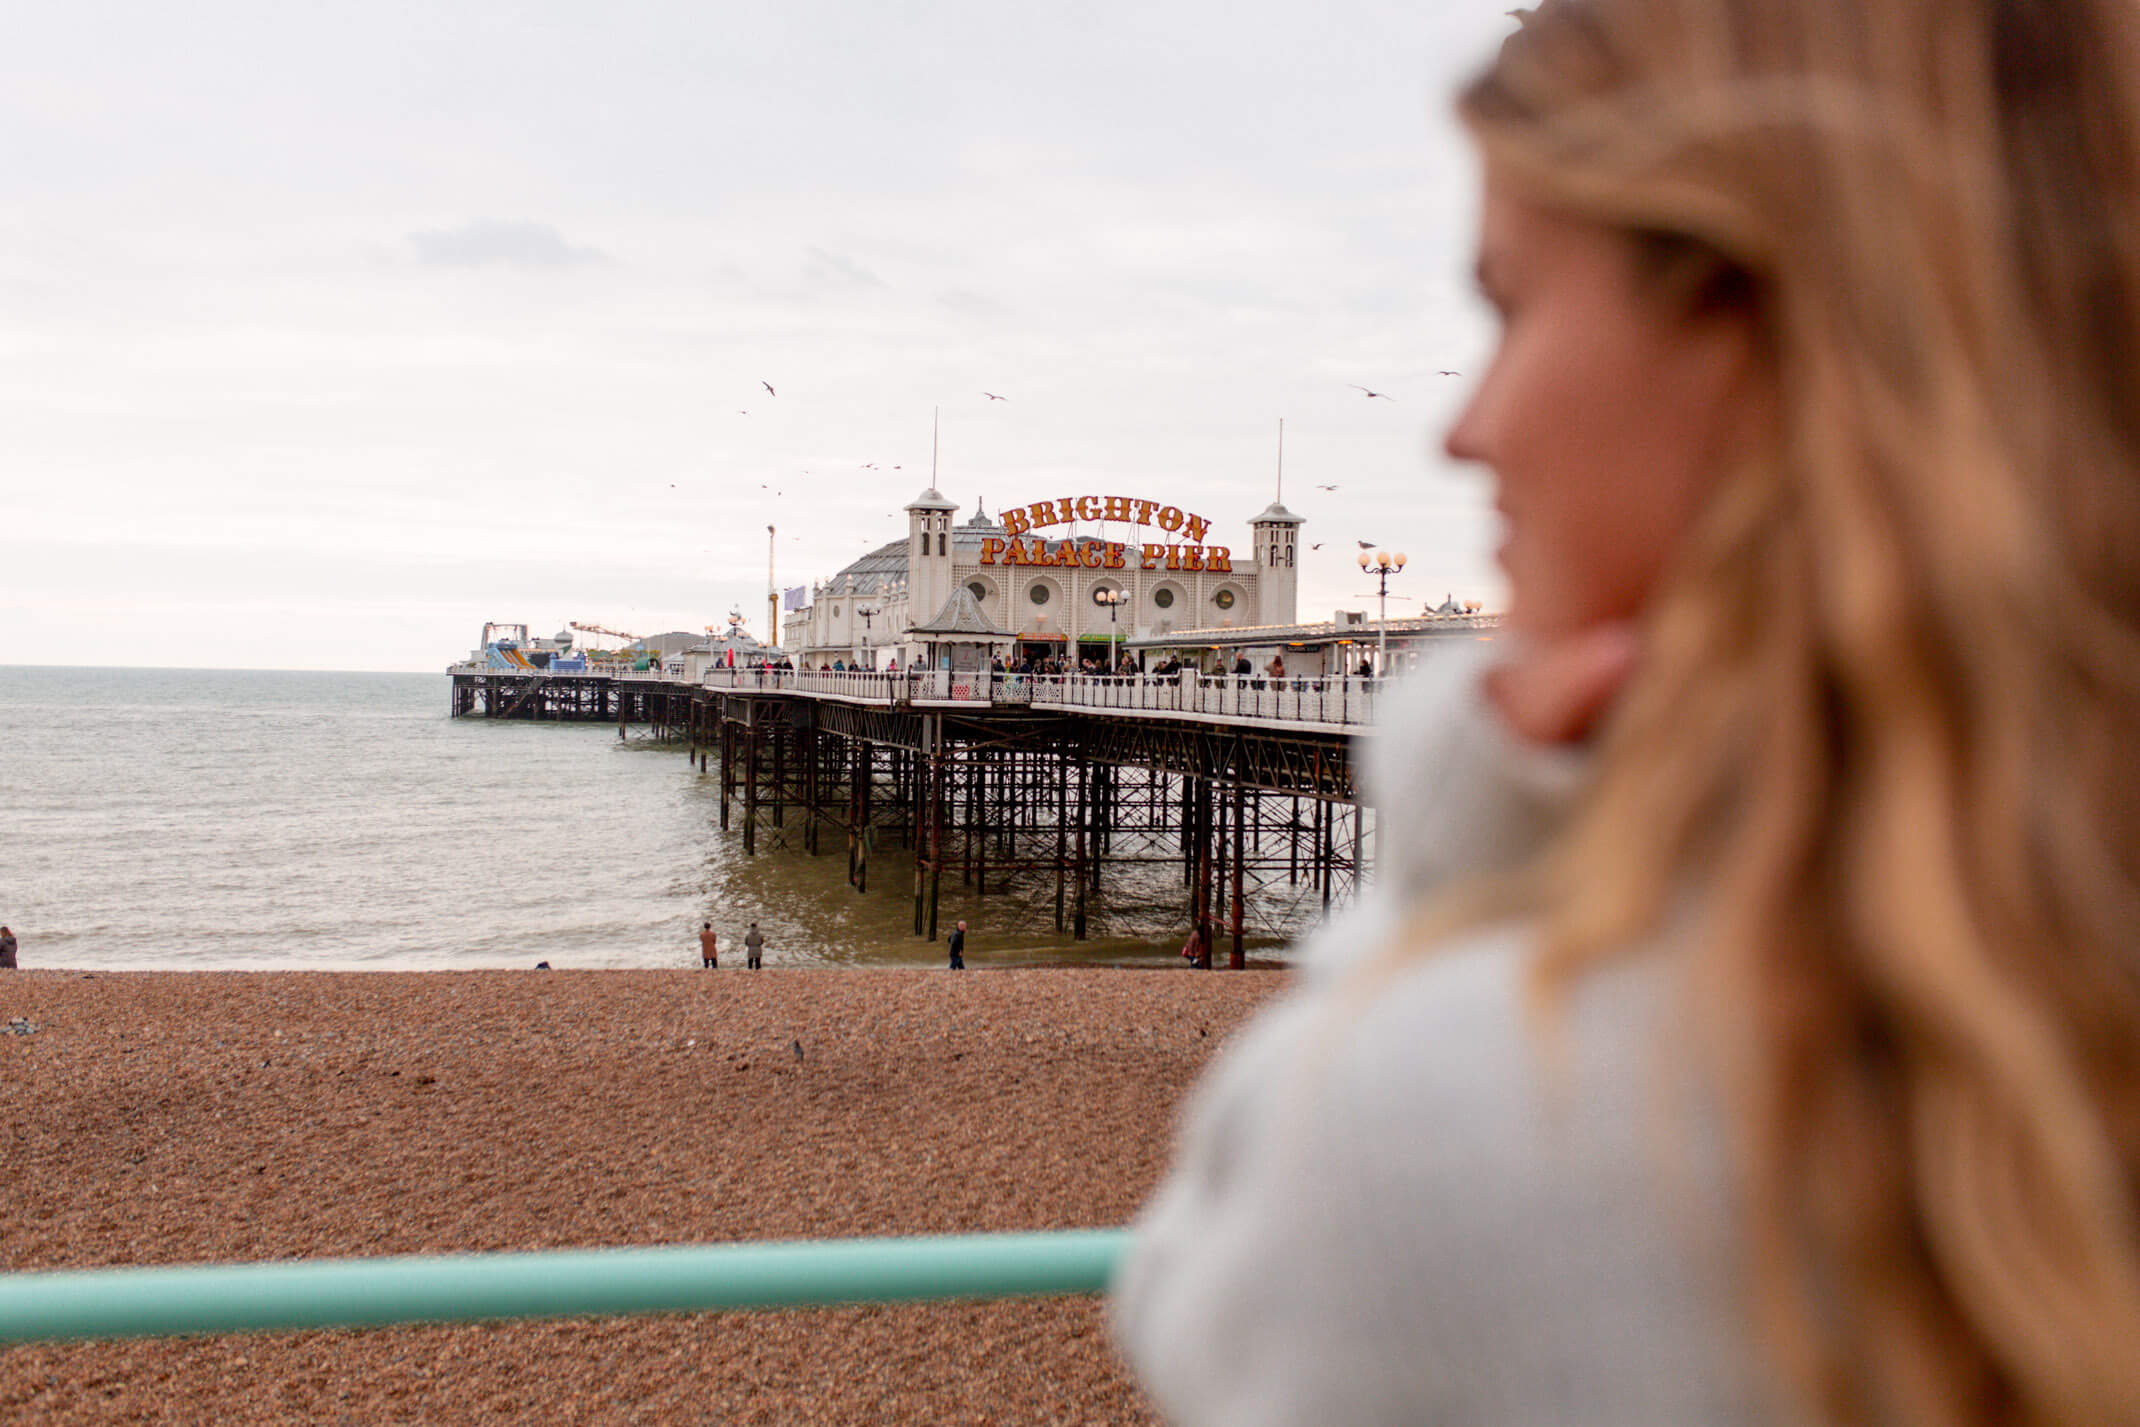 A Weekend Guide To Brighton, England: The best things to do in Brighton